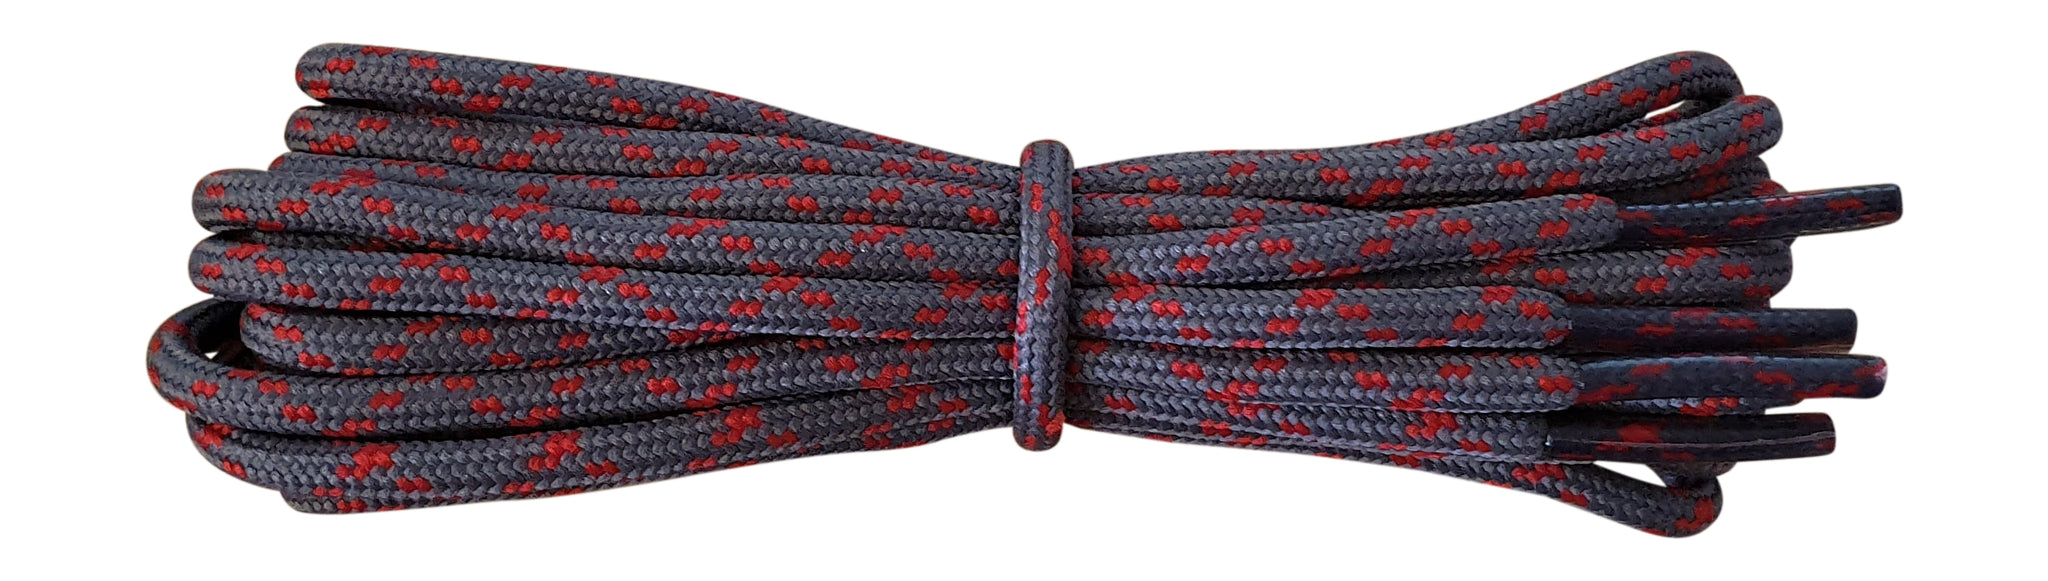 Strong round Shoelaces Dark Grey with Red flecks for walking shoes or trainers. - fabmania shoe laces